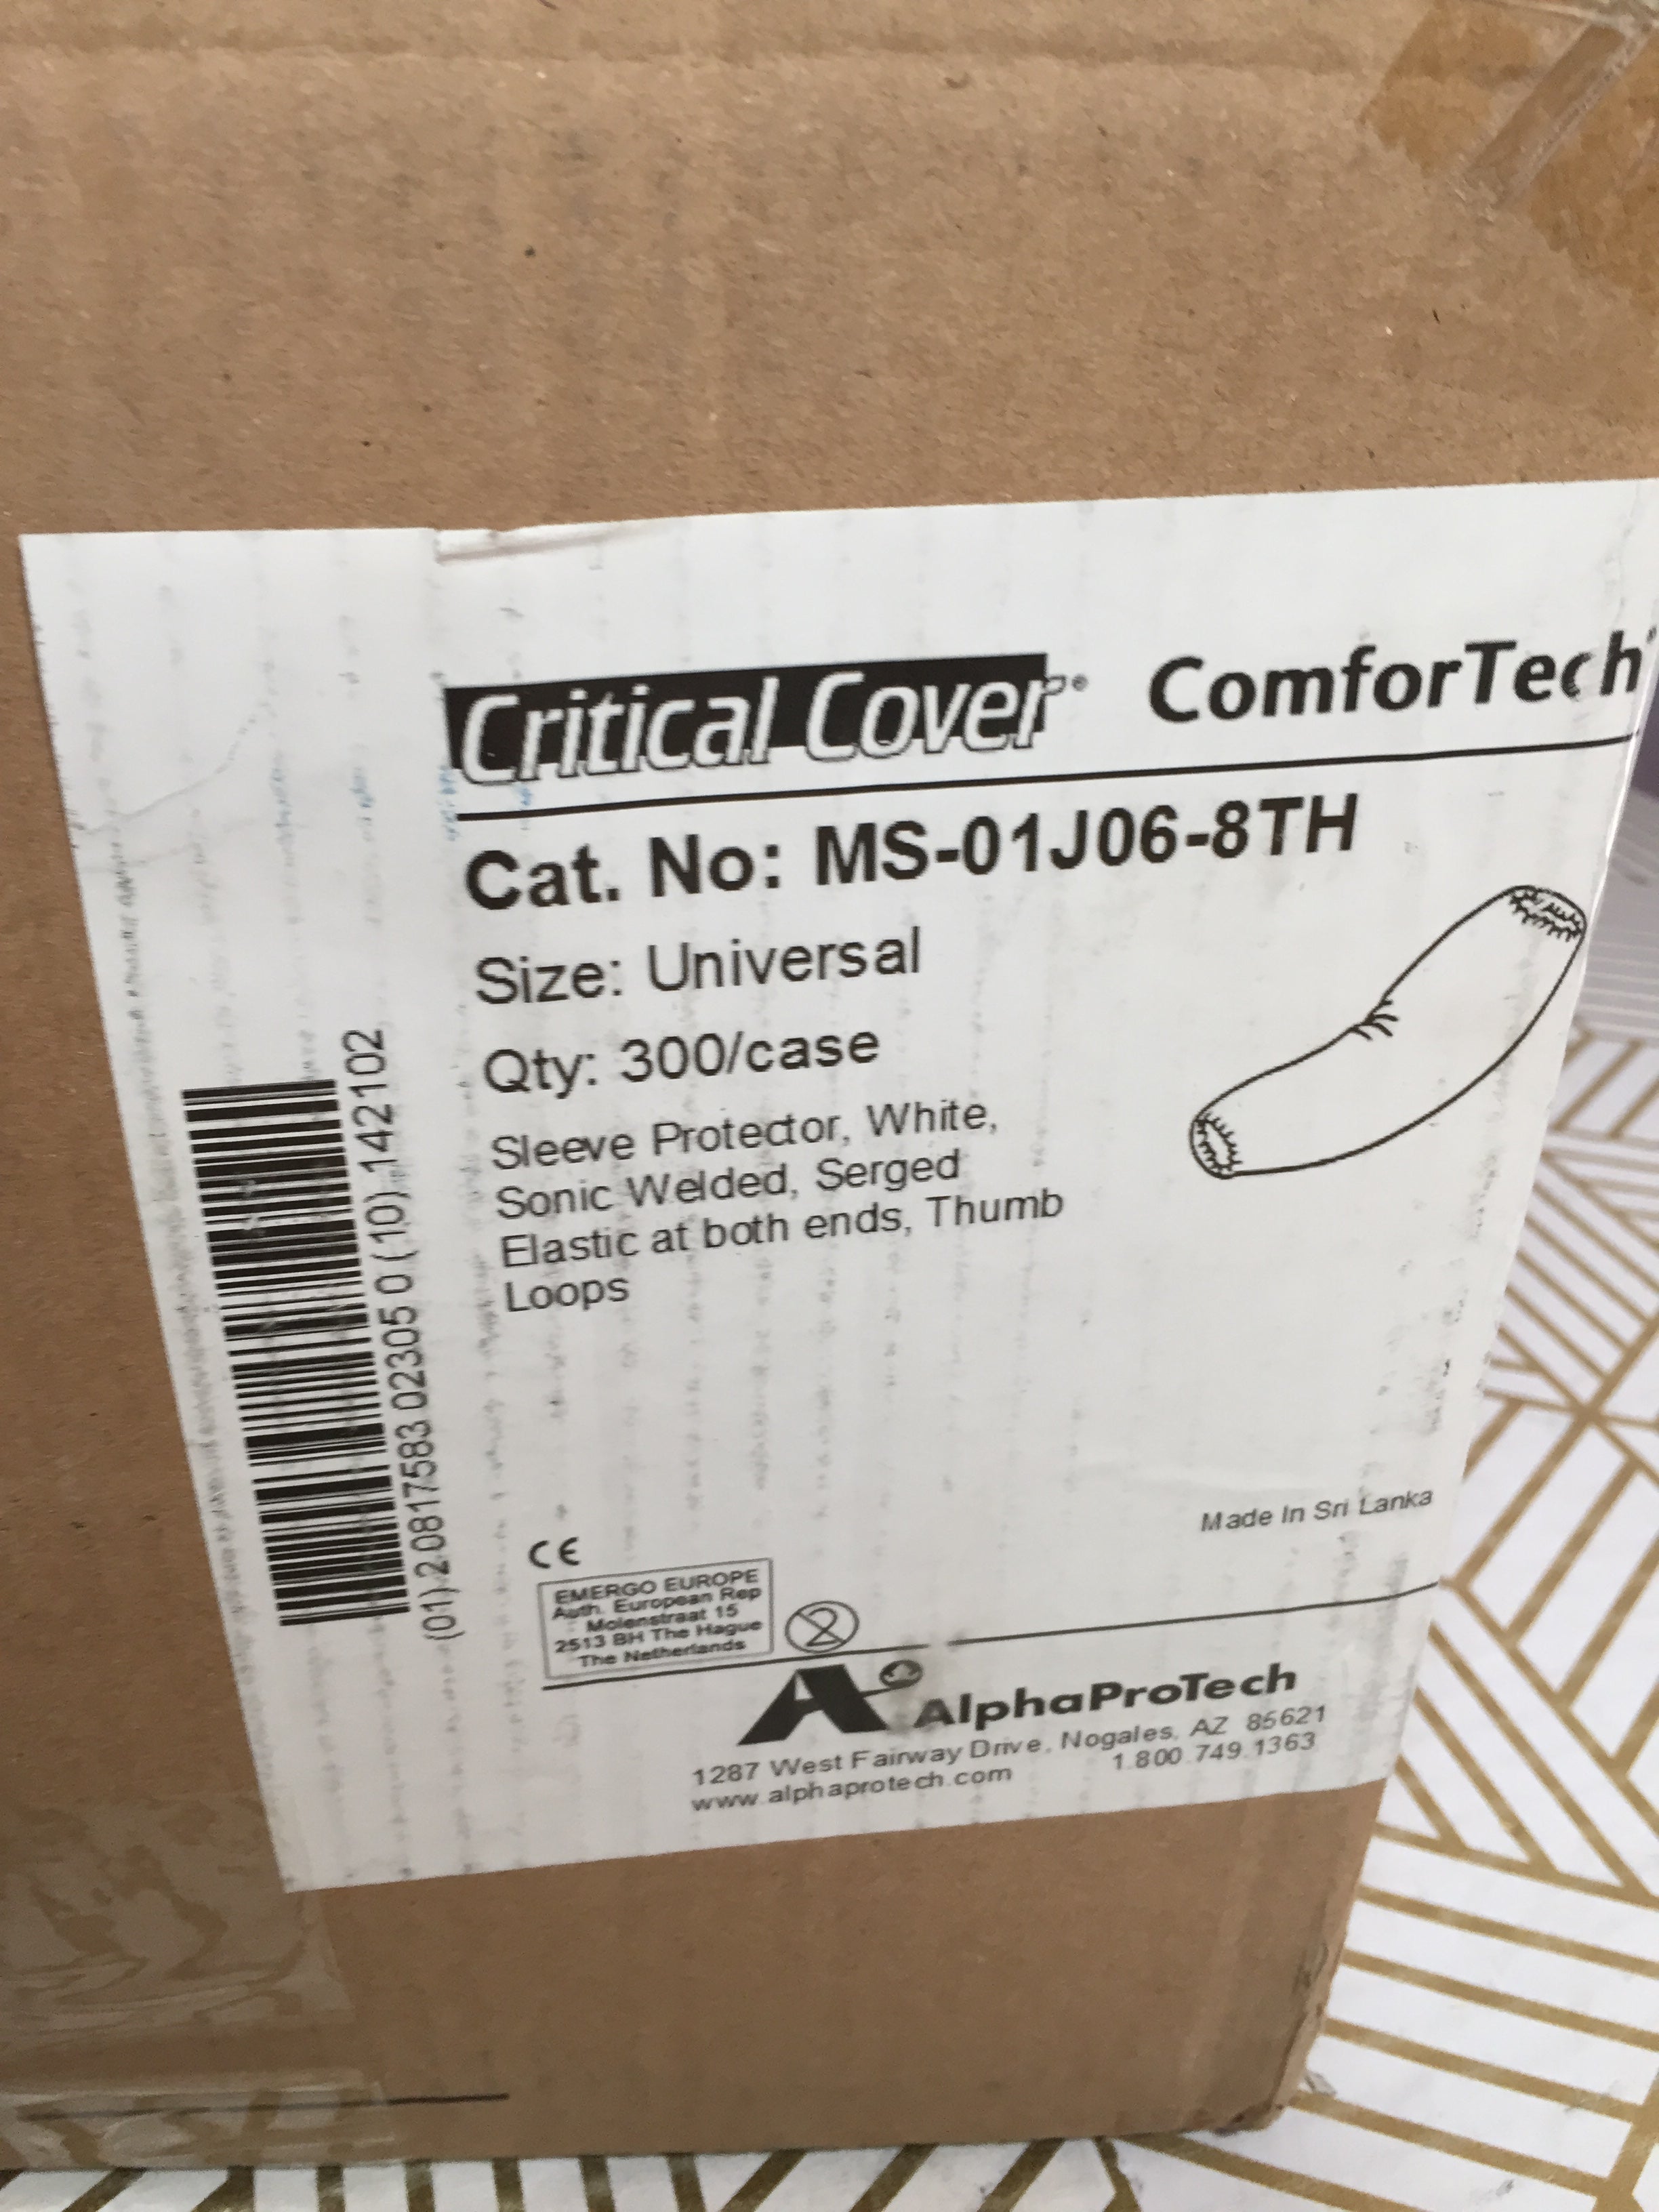 Critical Cover ComfoTech MS-01J06-8TH Sterile Sleeve Protectors | Case of 300 (8140789809390)